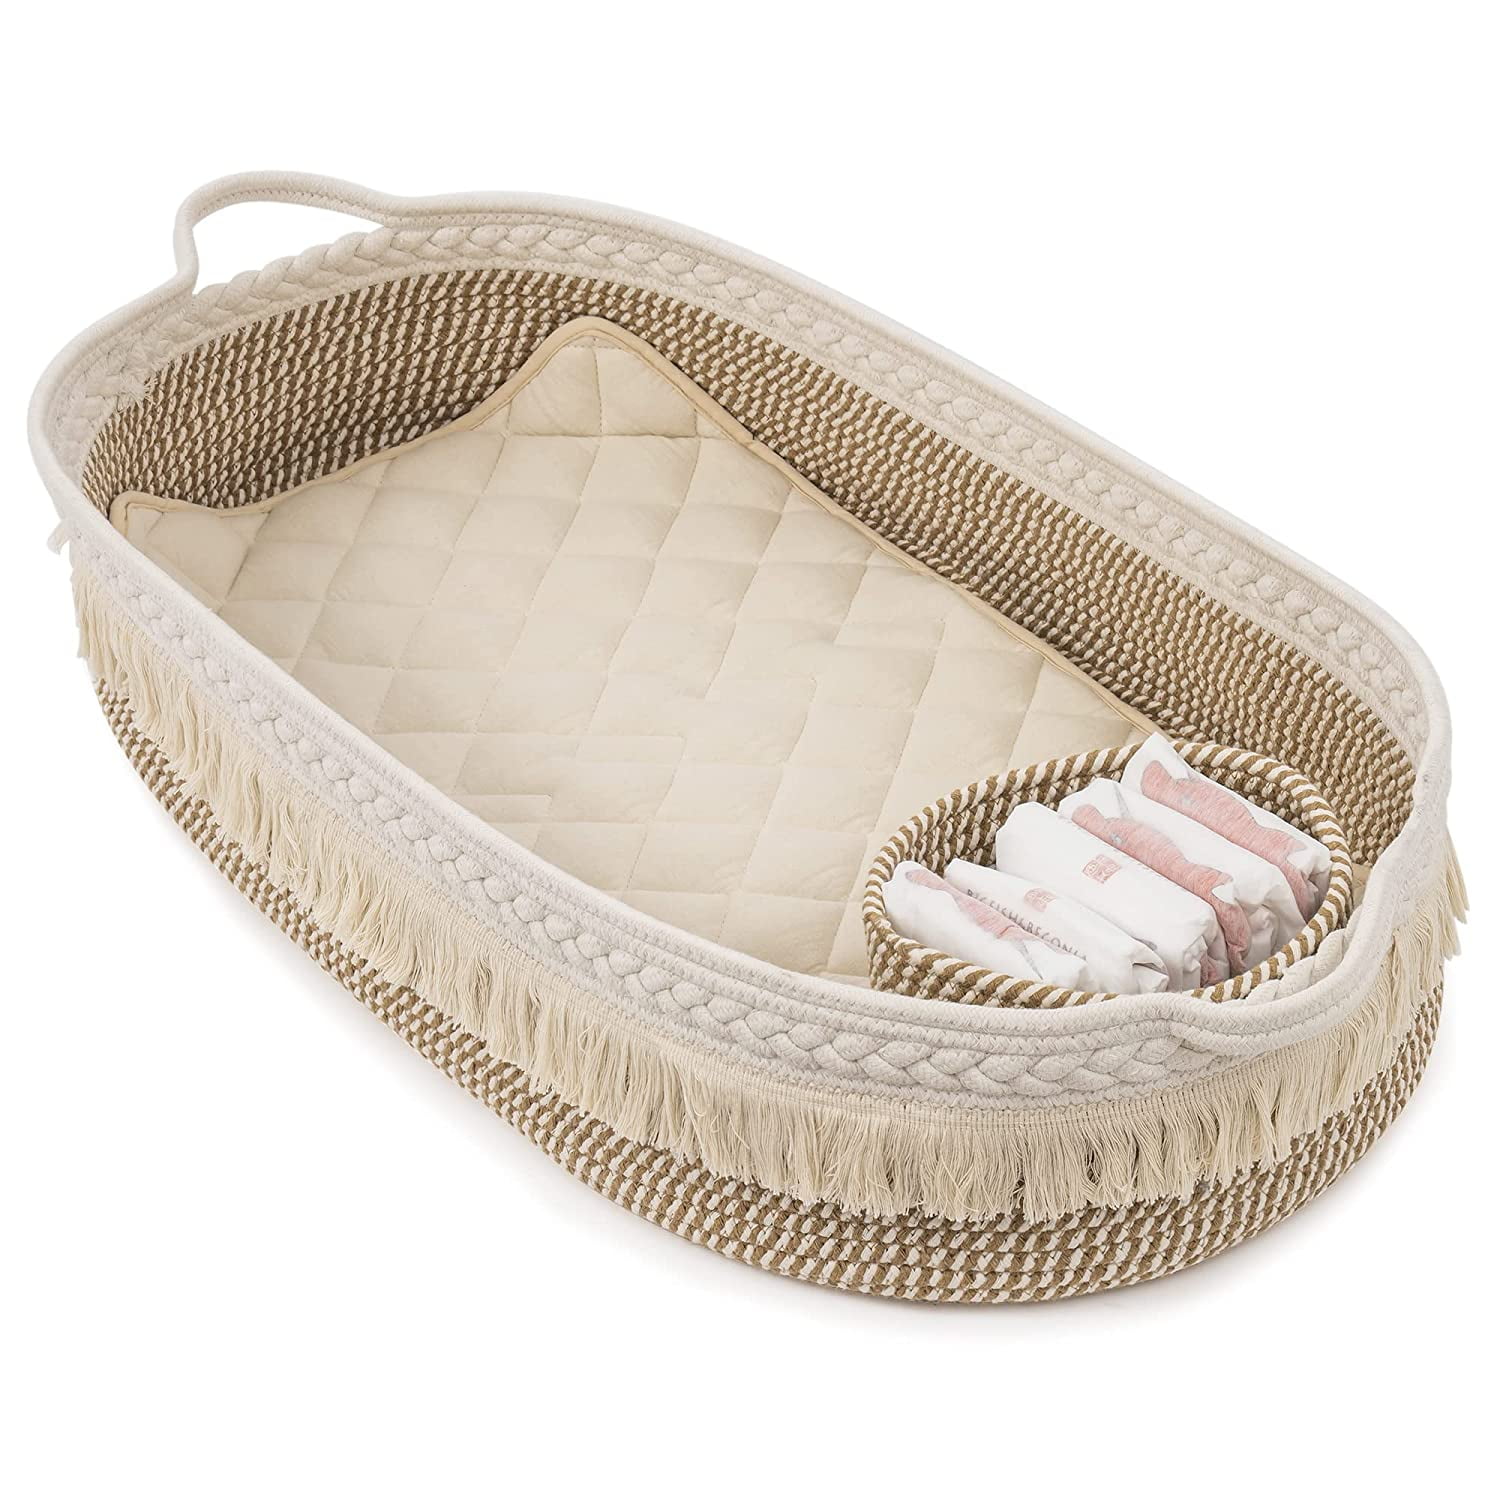 Lumbi Baby Changing Moses Basket - Multi Handle Handmade Cotton Rope Set with Portable Bag, Soft Blanket, Waterproof Pad, and Foam Mattress w/Cover